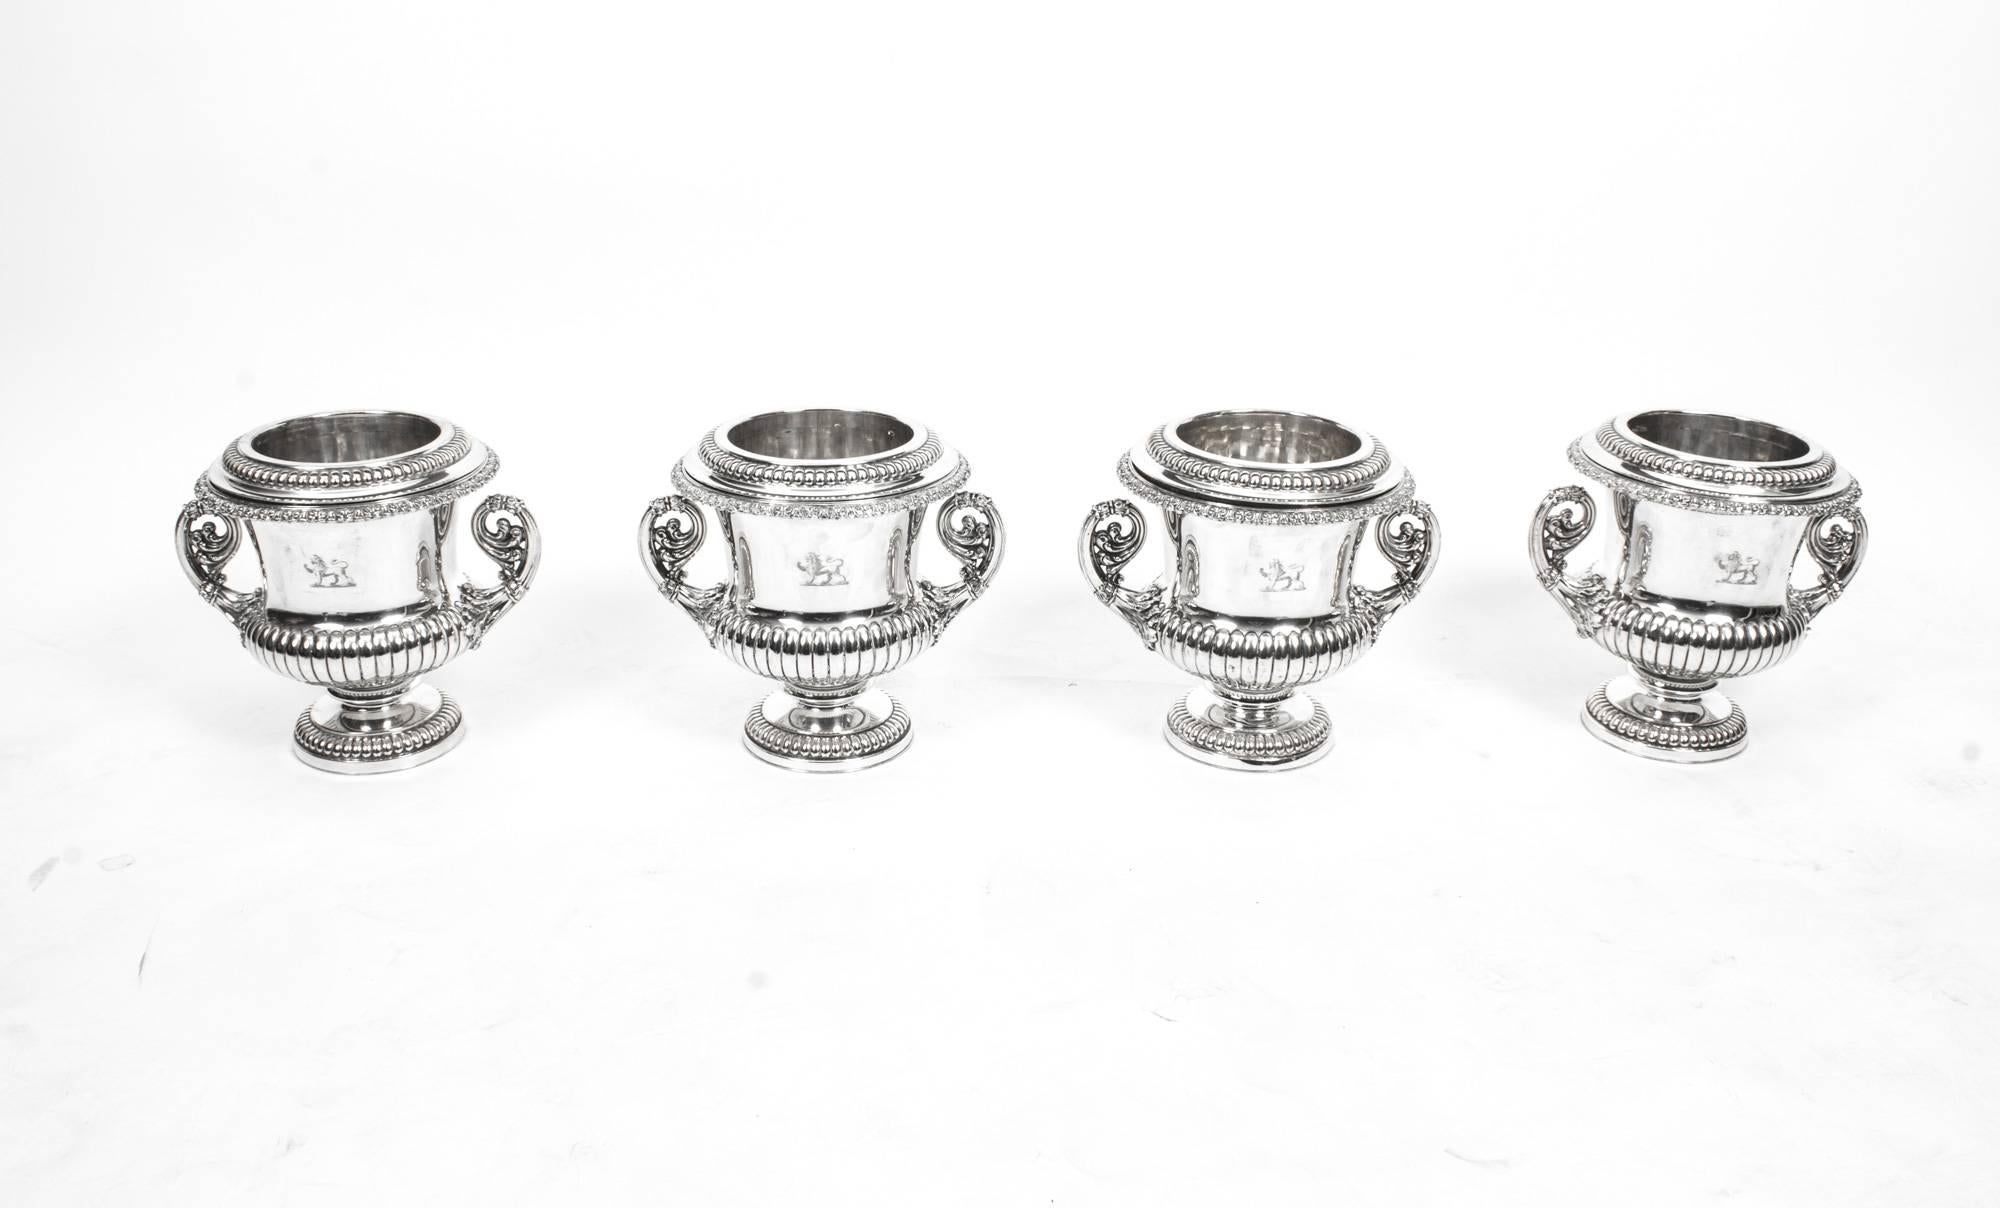 This is a wonderful and rare set of four antique English Old Sheffield Plate, silver on copper, Regency wine coolers, circa 1820 in date.

Each is fitted with an exceptional pair of decorative handles embellished with chased leaf